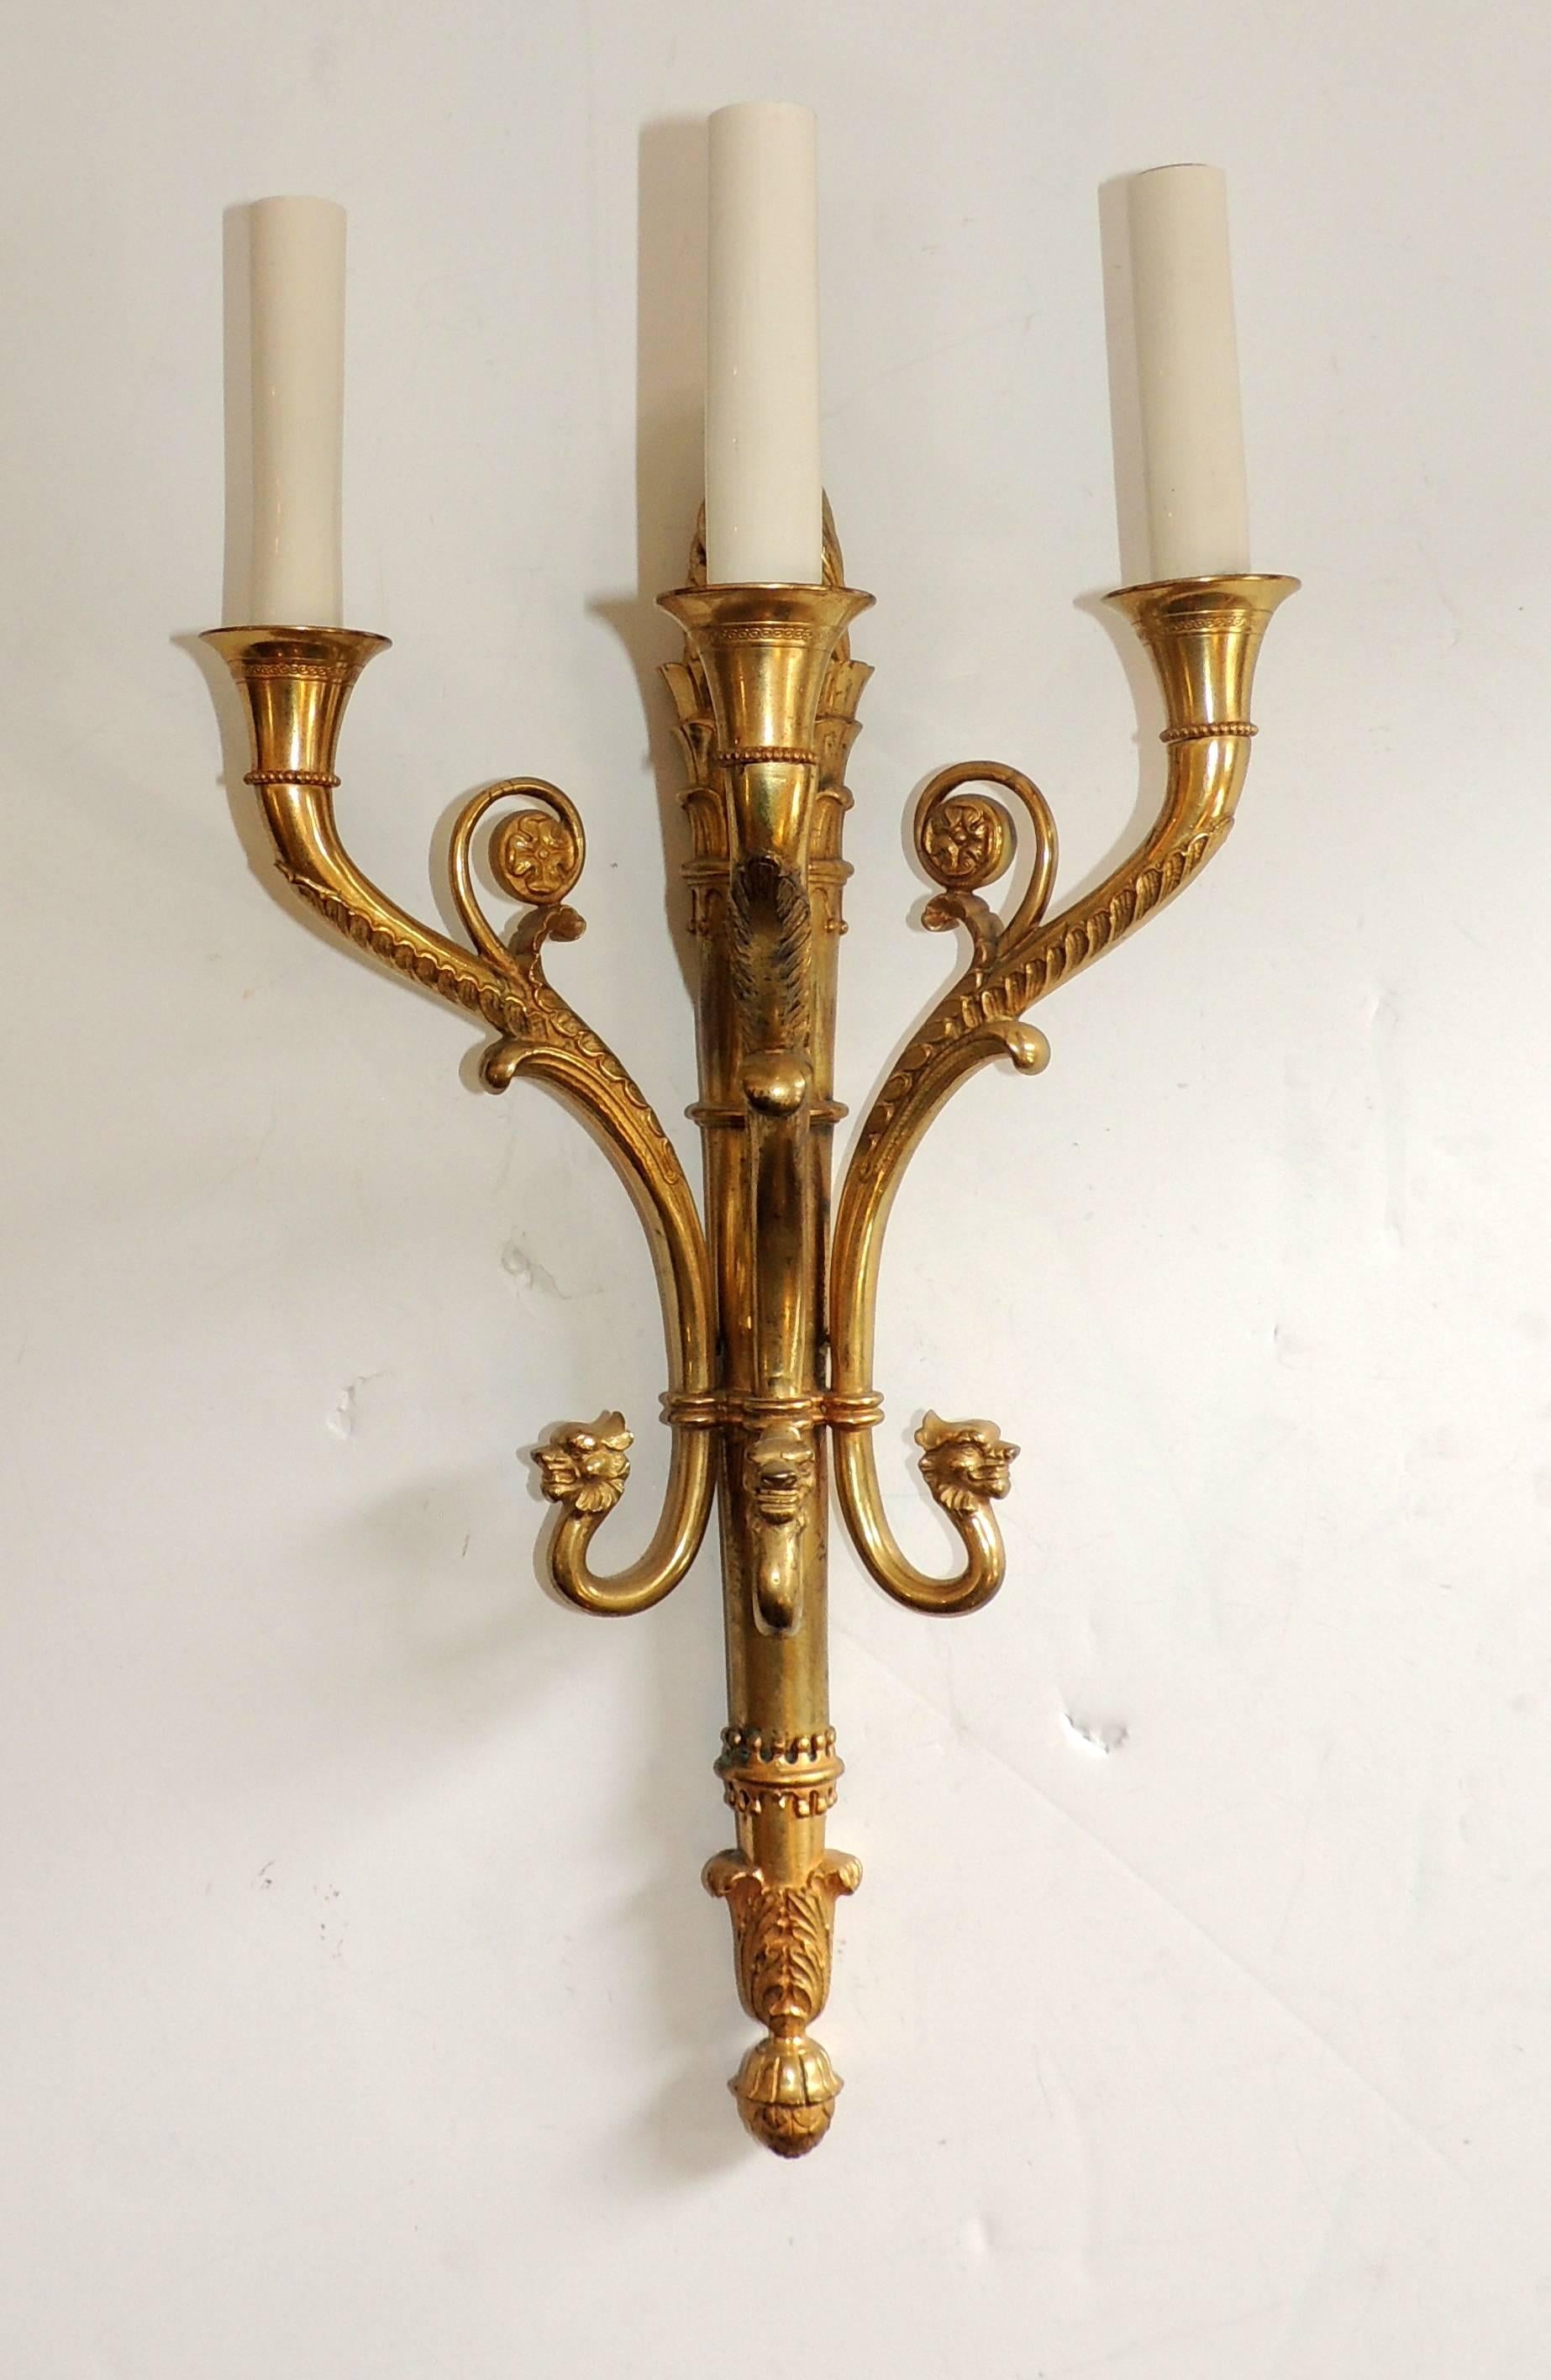 Early 20th Century Elegant Pair of Regency Neoclassical French Empire Gilt Doré Bronze Lion Sconces For Sale